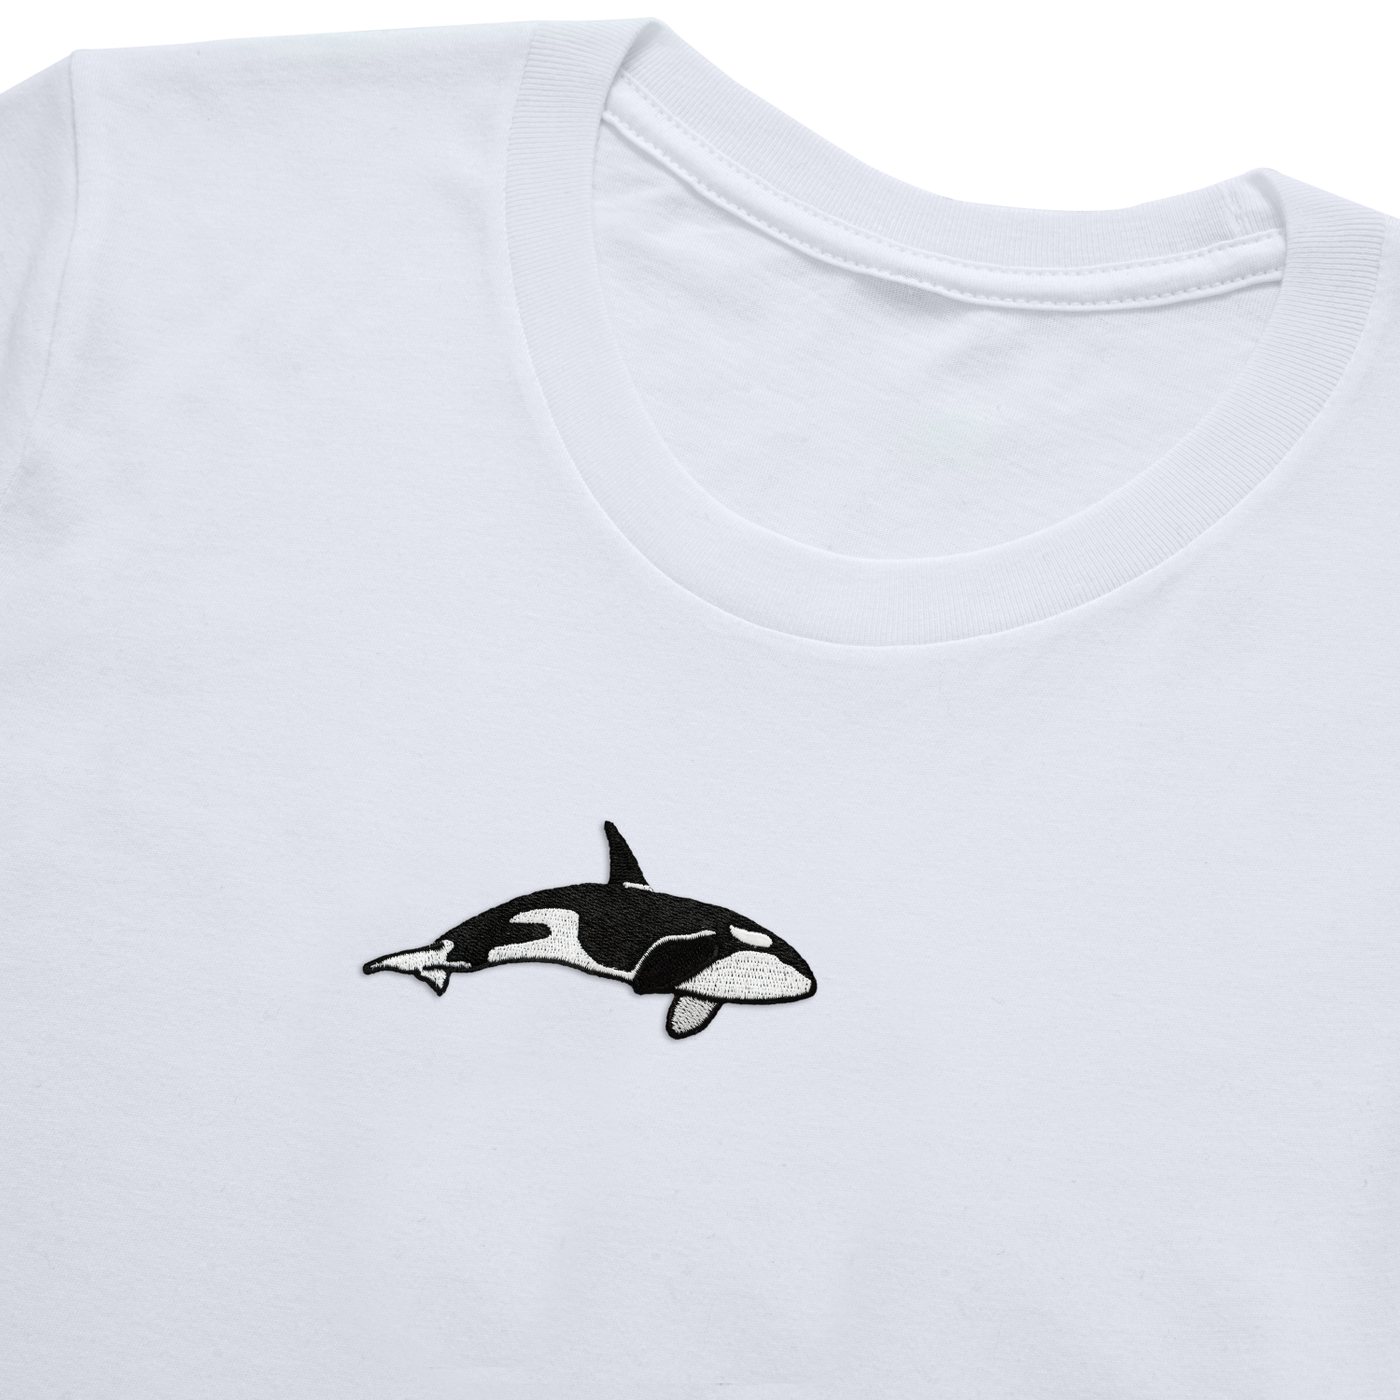 Bobby's Planet Men's Embroidered Orca T-Shirt from Seven Seas Fish Animals Collection in White Color#color_white